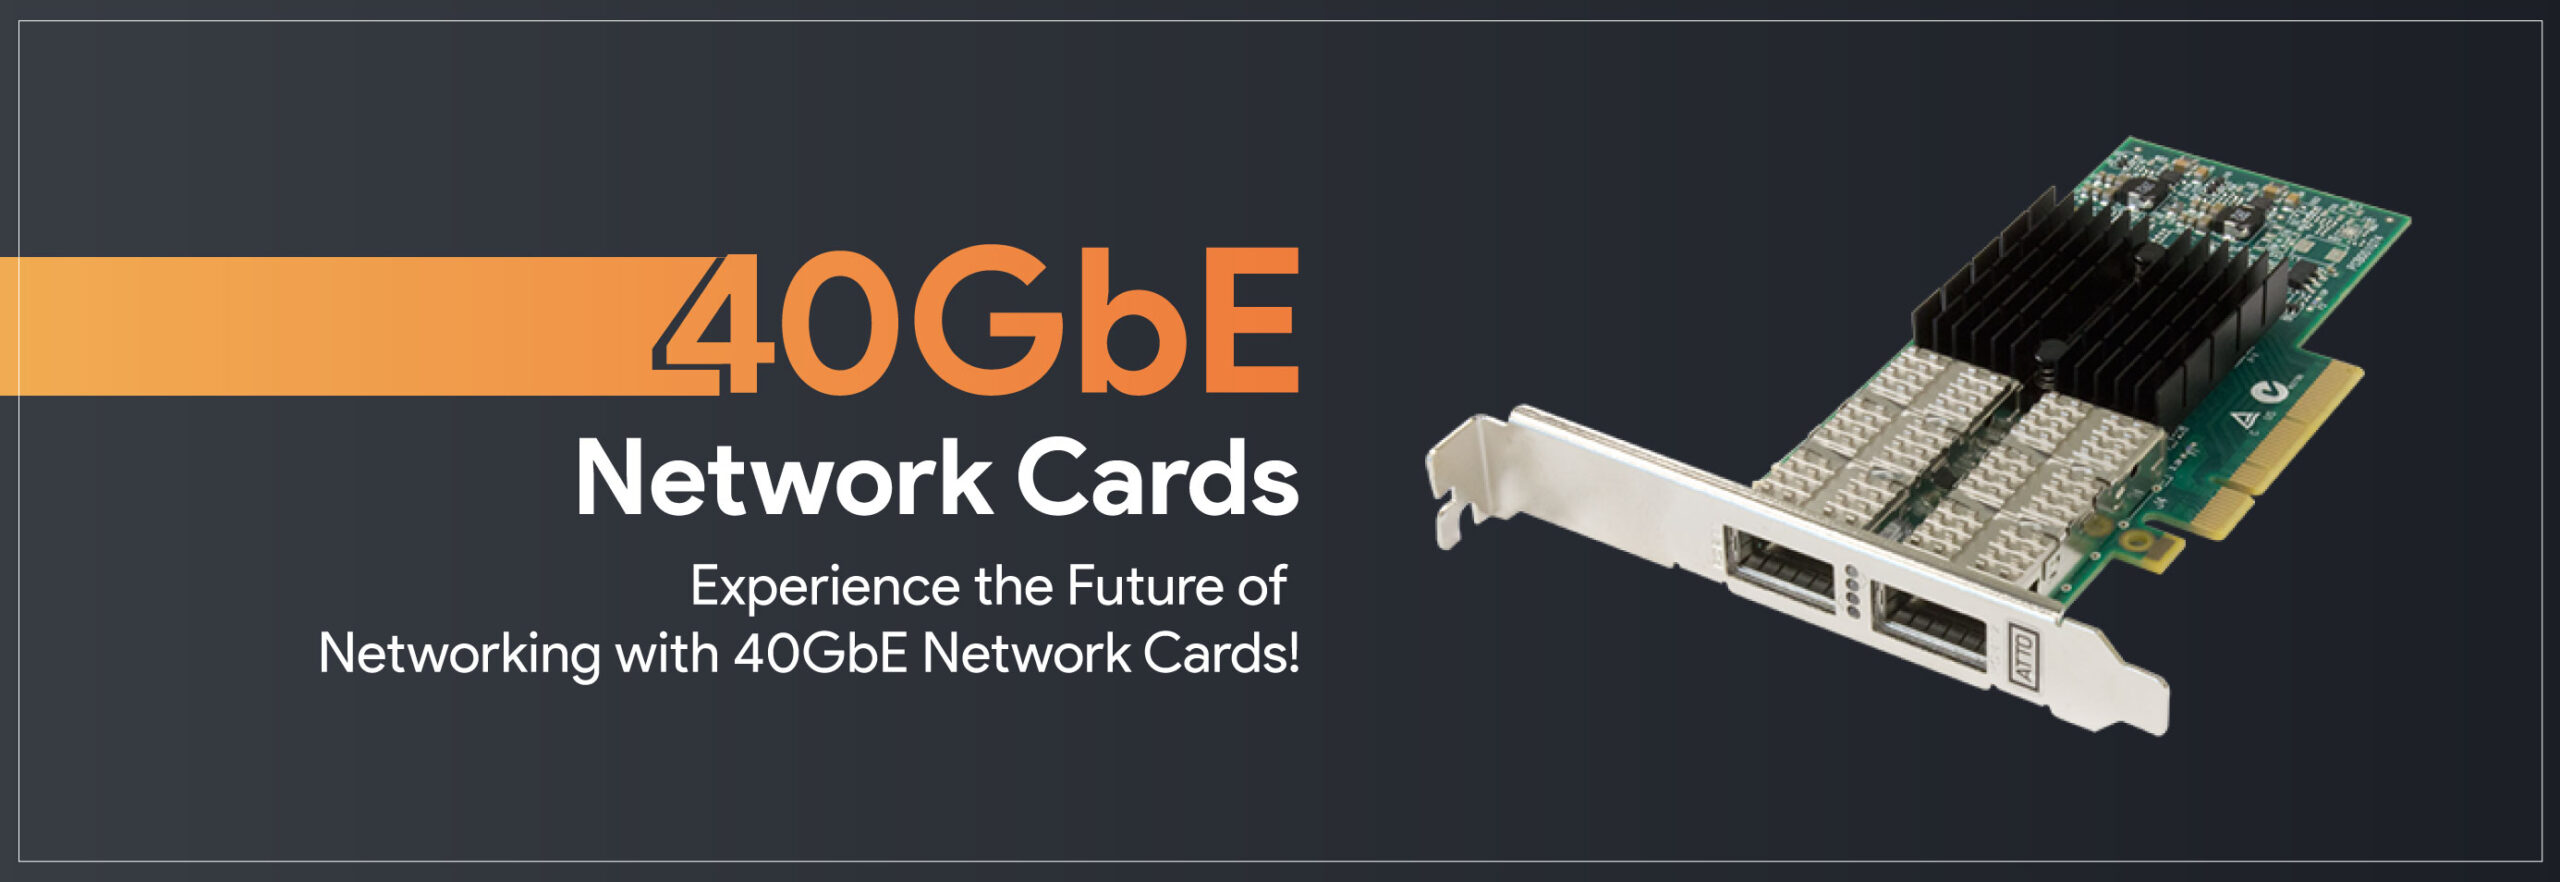 40GbE-Network-Cards